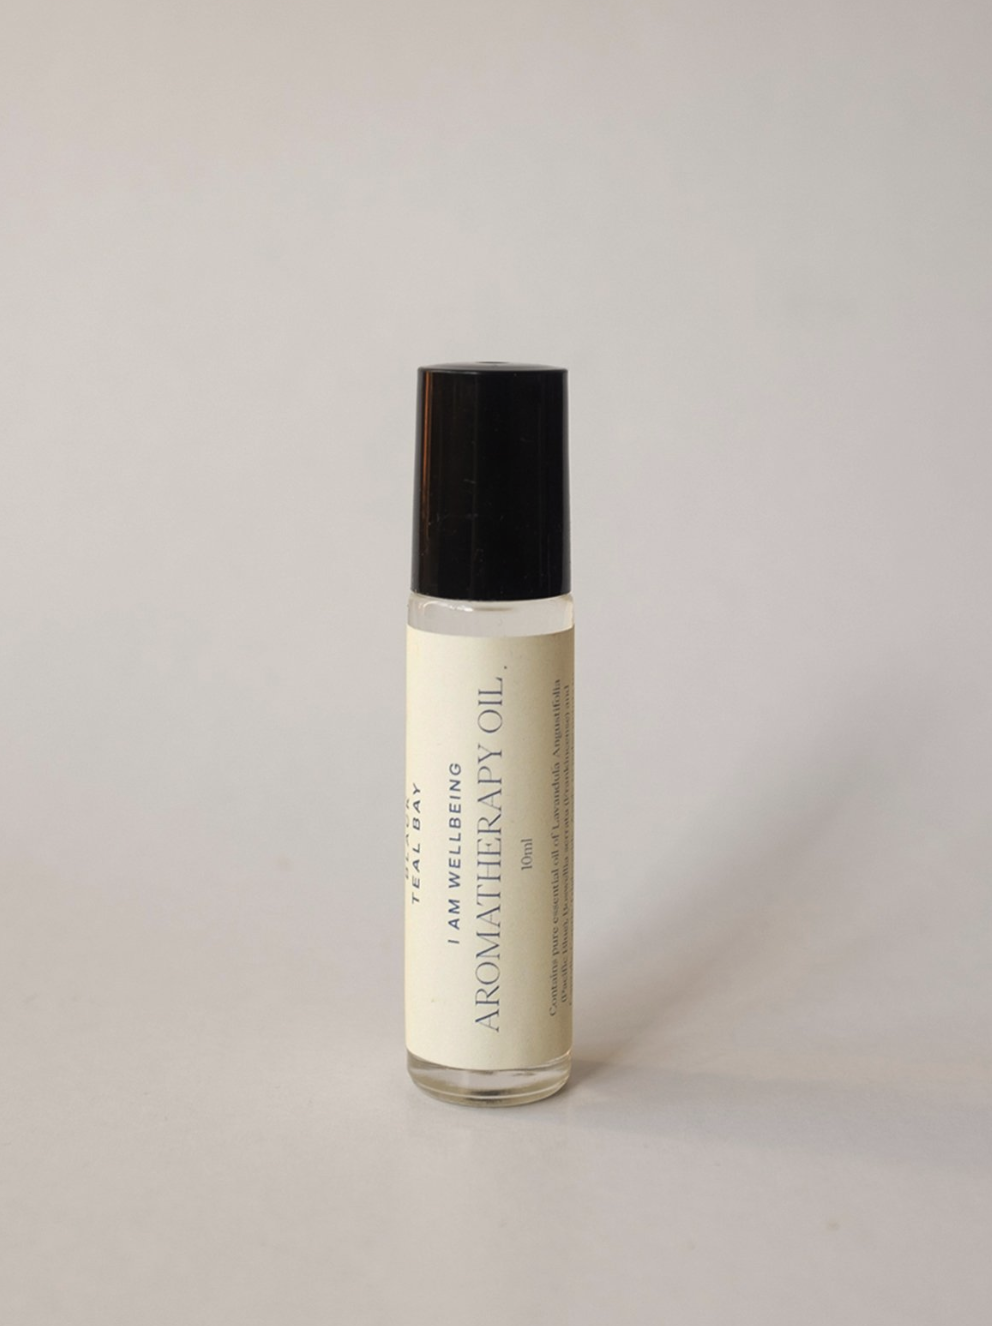 I Am Wellbeing (aromatherapy roll-on oil) - Black Teal Bay - Florafauna